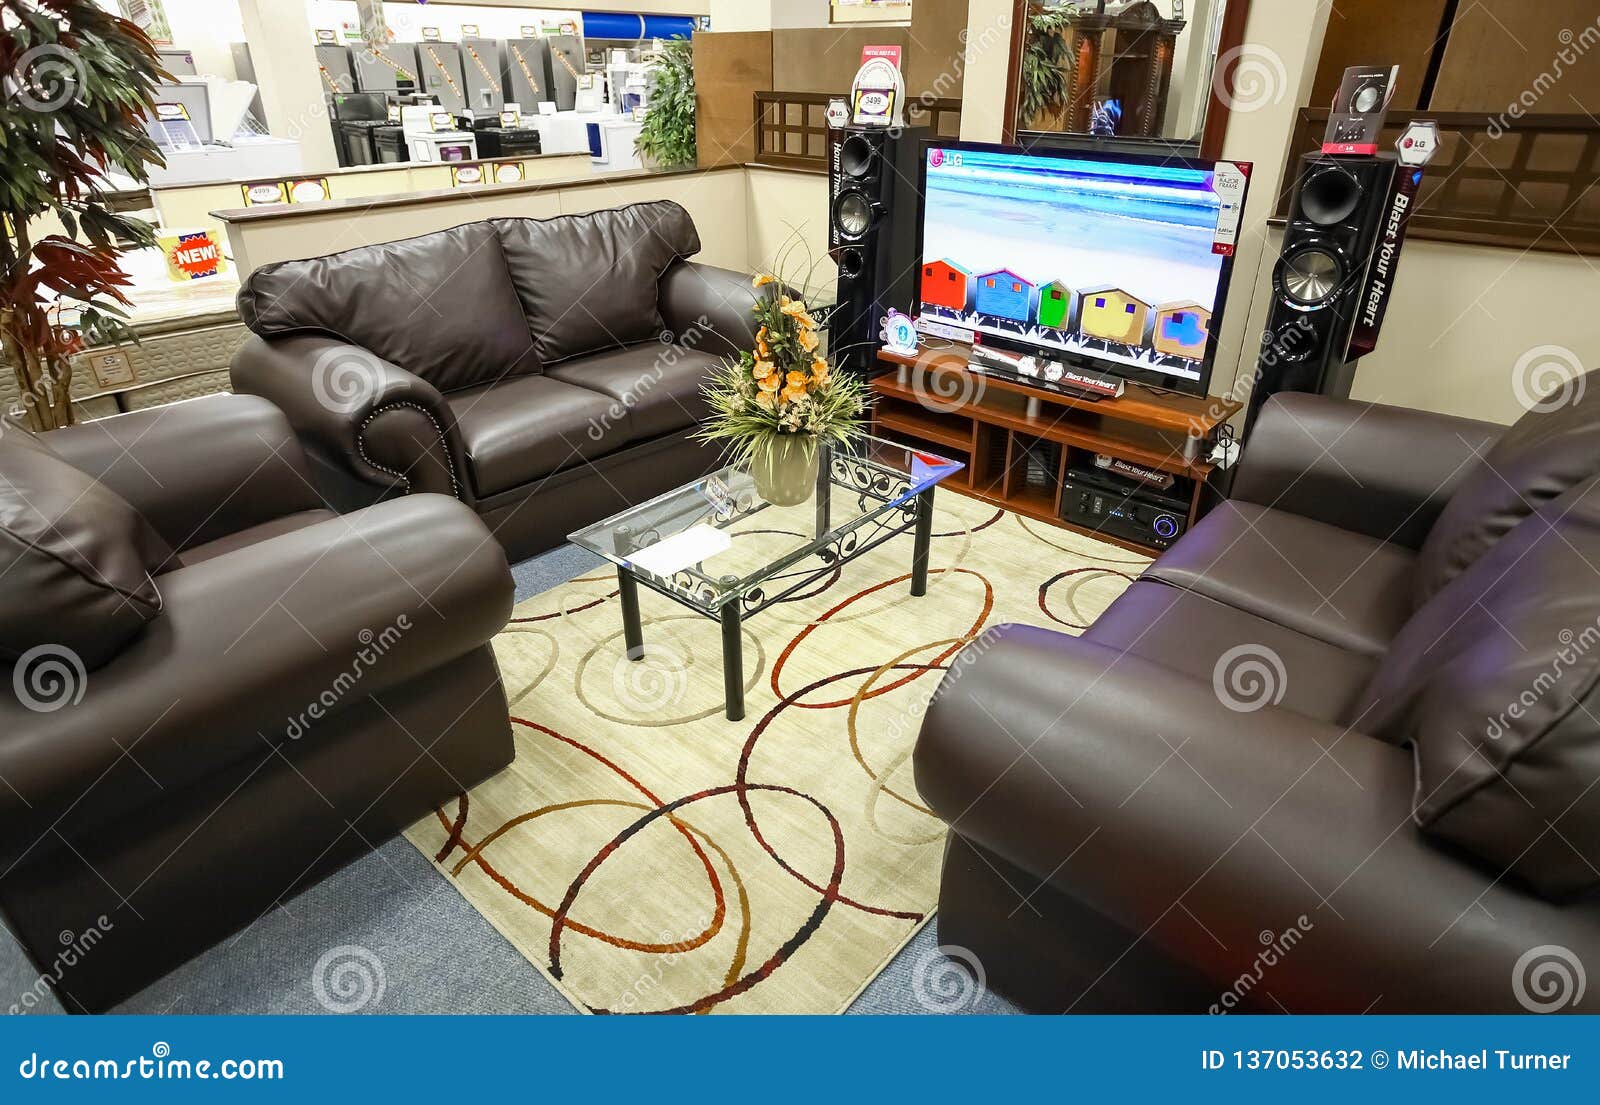 Inside Interior Of A Home Furnishing Store Editorial Photography